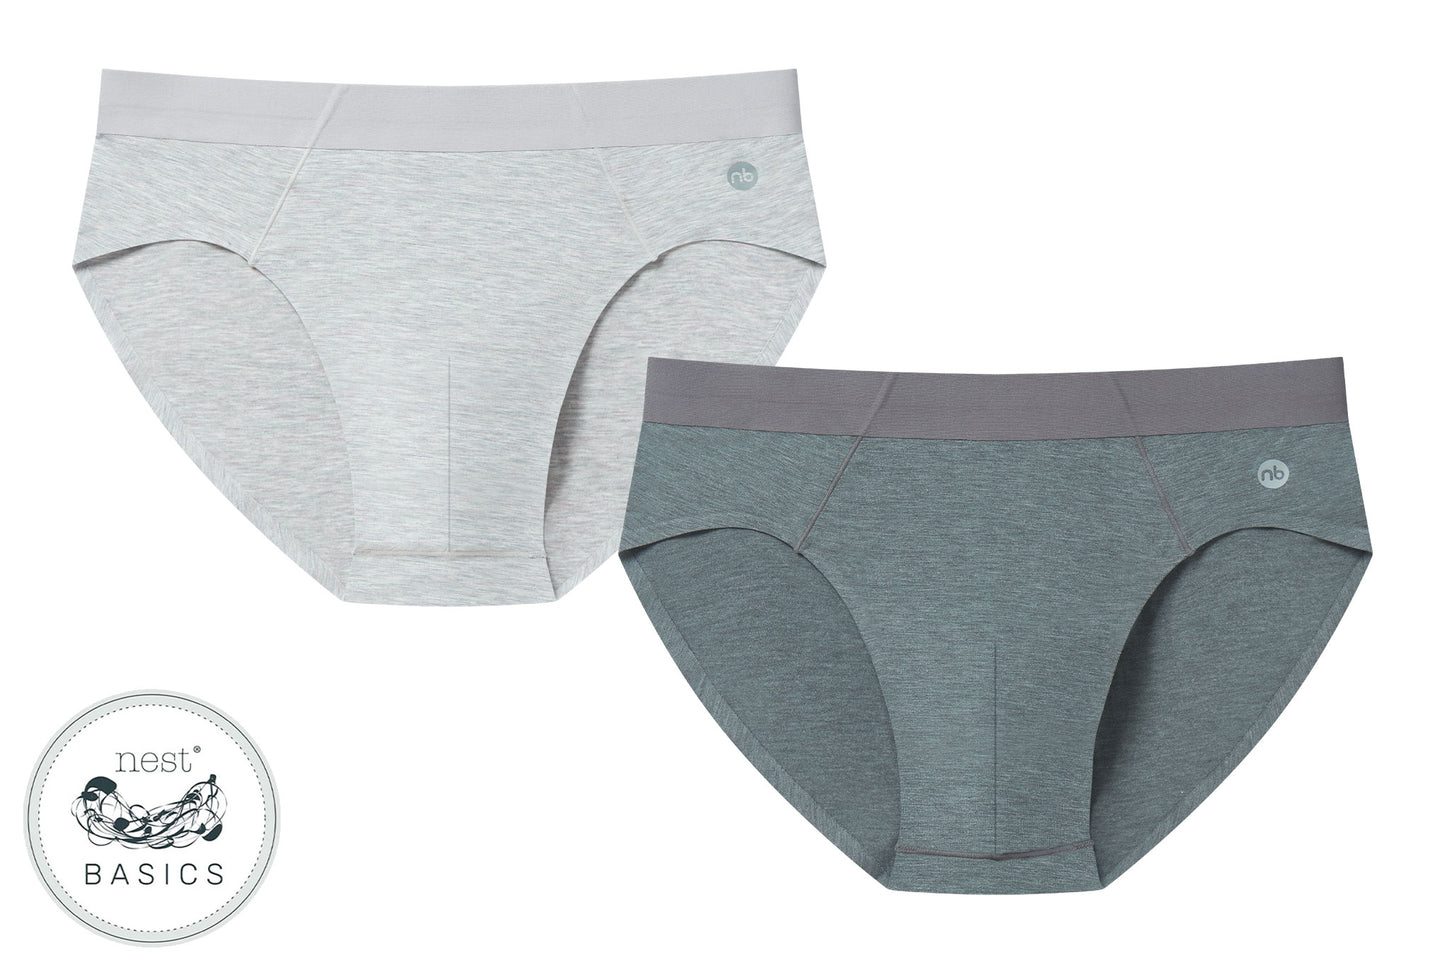 Men's Basics Briefs (Bamboo Spandex, 2 Pack) - Charcoal And Grey